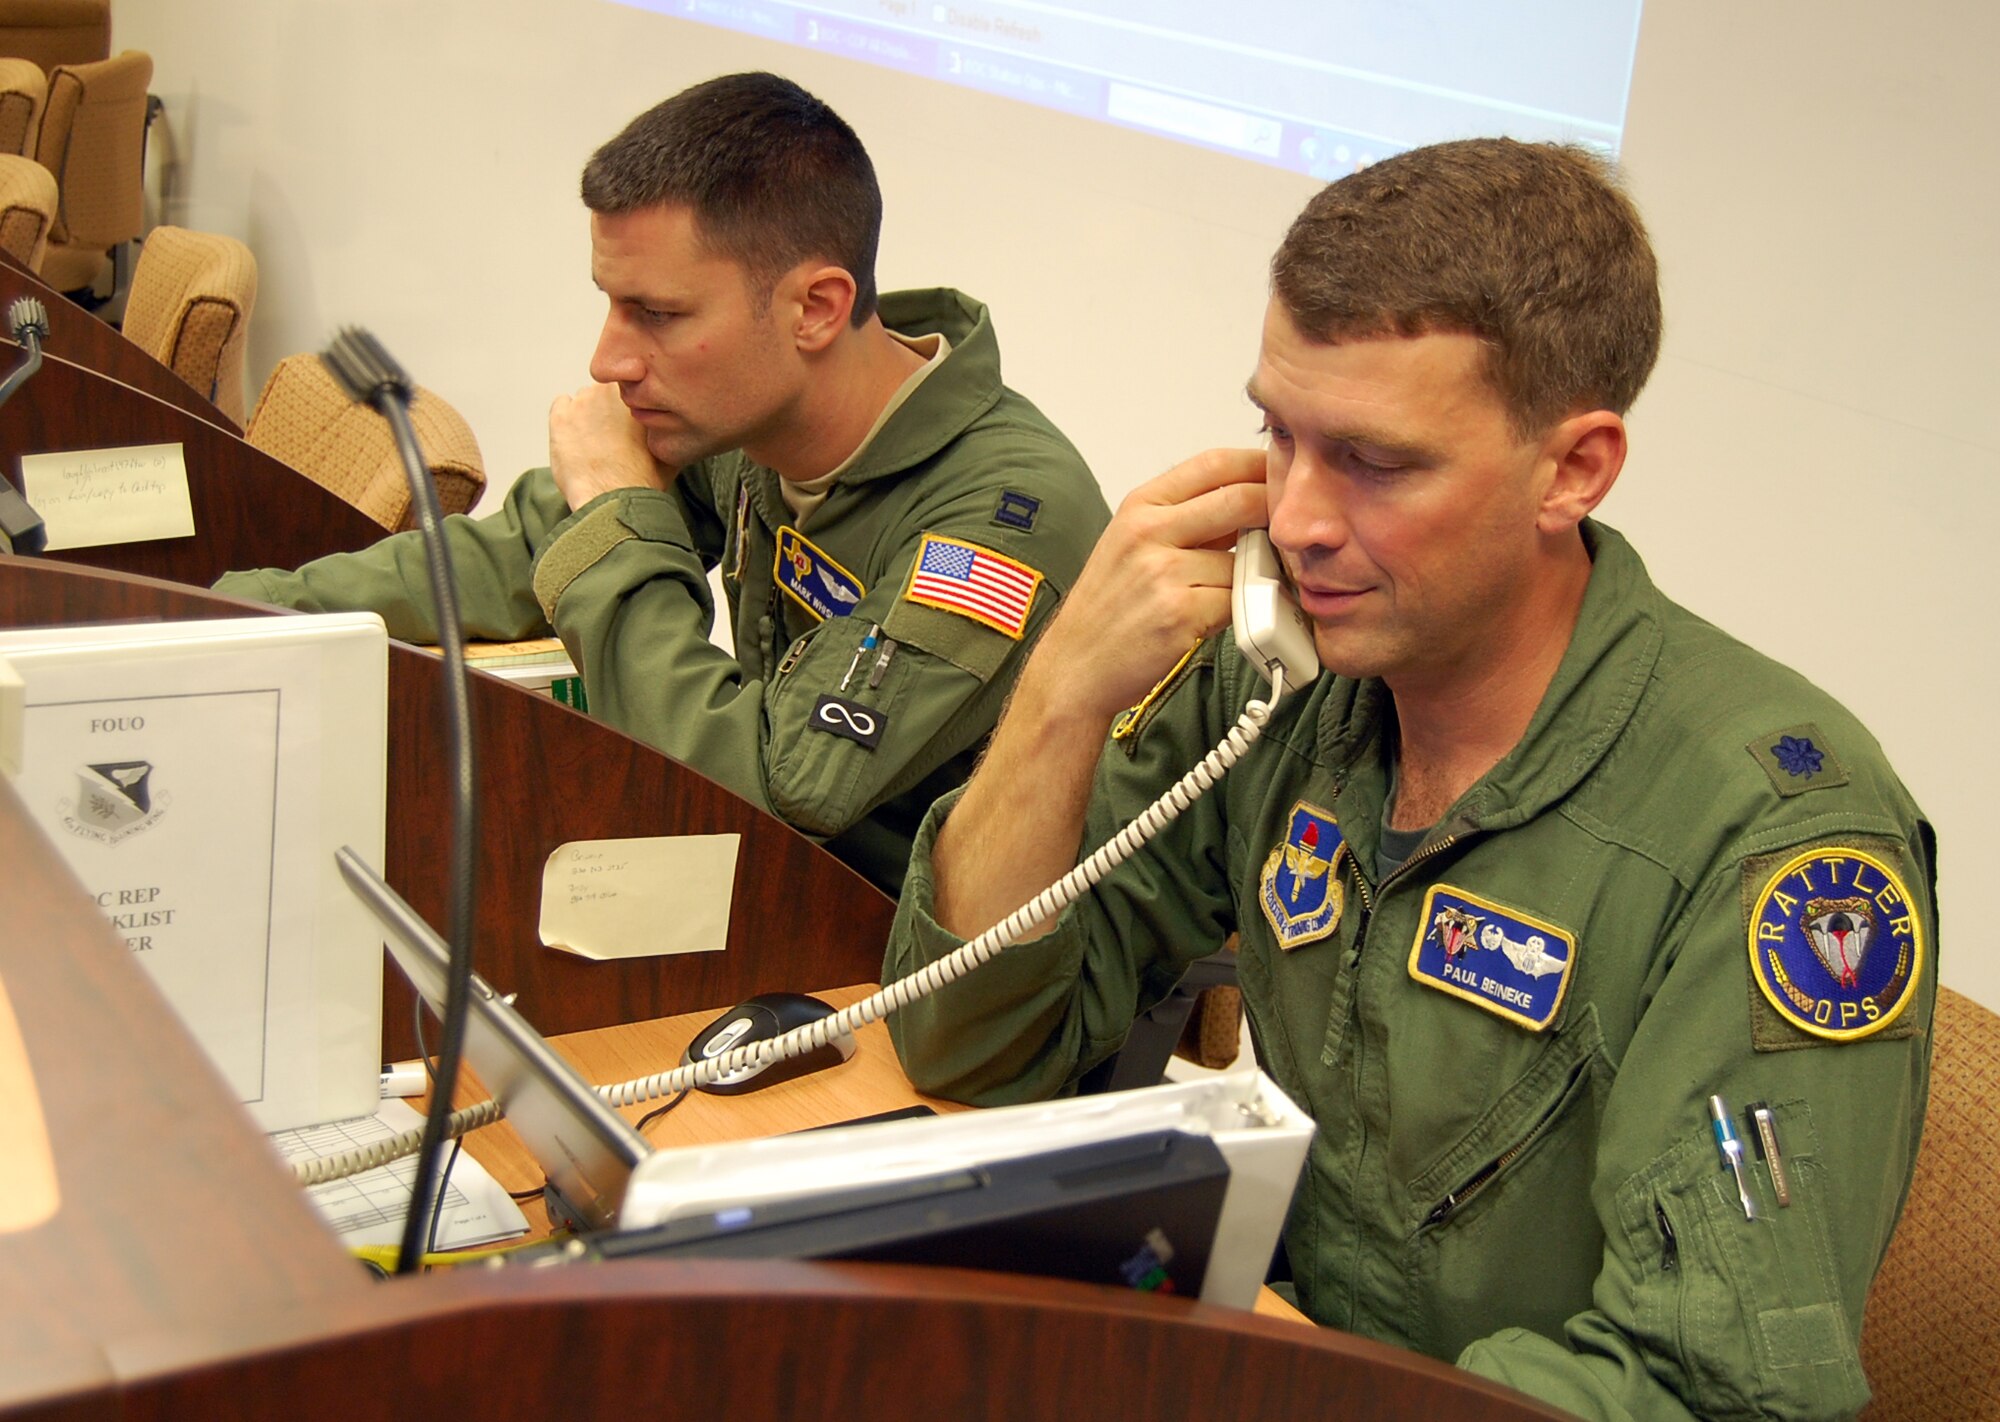 LAUGHLIN AIR FORCE BASE, Texas – Capt. Mark Whisler and Lt. Col. Paul Beineke coordinate movements during an exercise from the 47th Flying Training Wing Emergency Operations Center here Sept. 24.  Laughlin’s state-of-the-art EOC acts as a central command location for any large-scale event taking place on base in which quick, clear communication among a variety of key agencies is essential.  (U.S. Air Force photo by Staff Sgt Austin M. May)